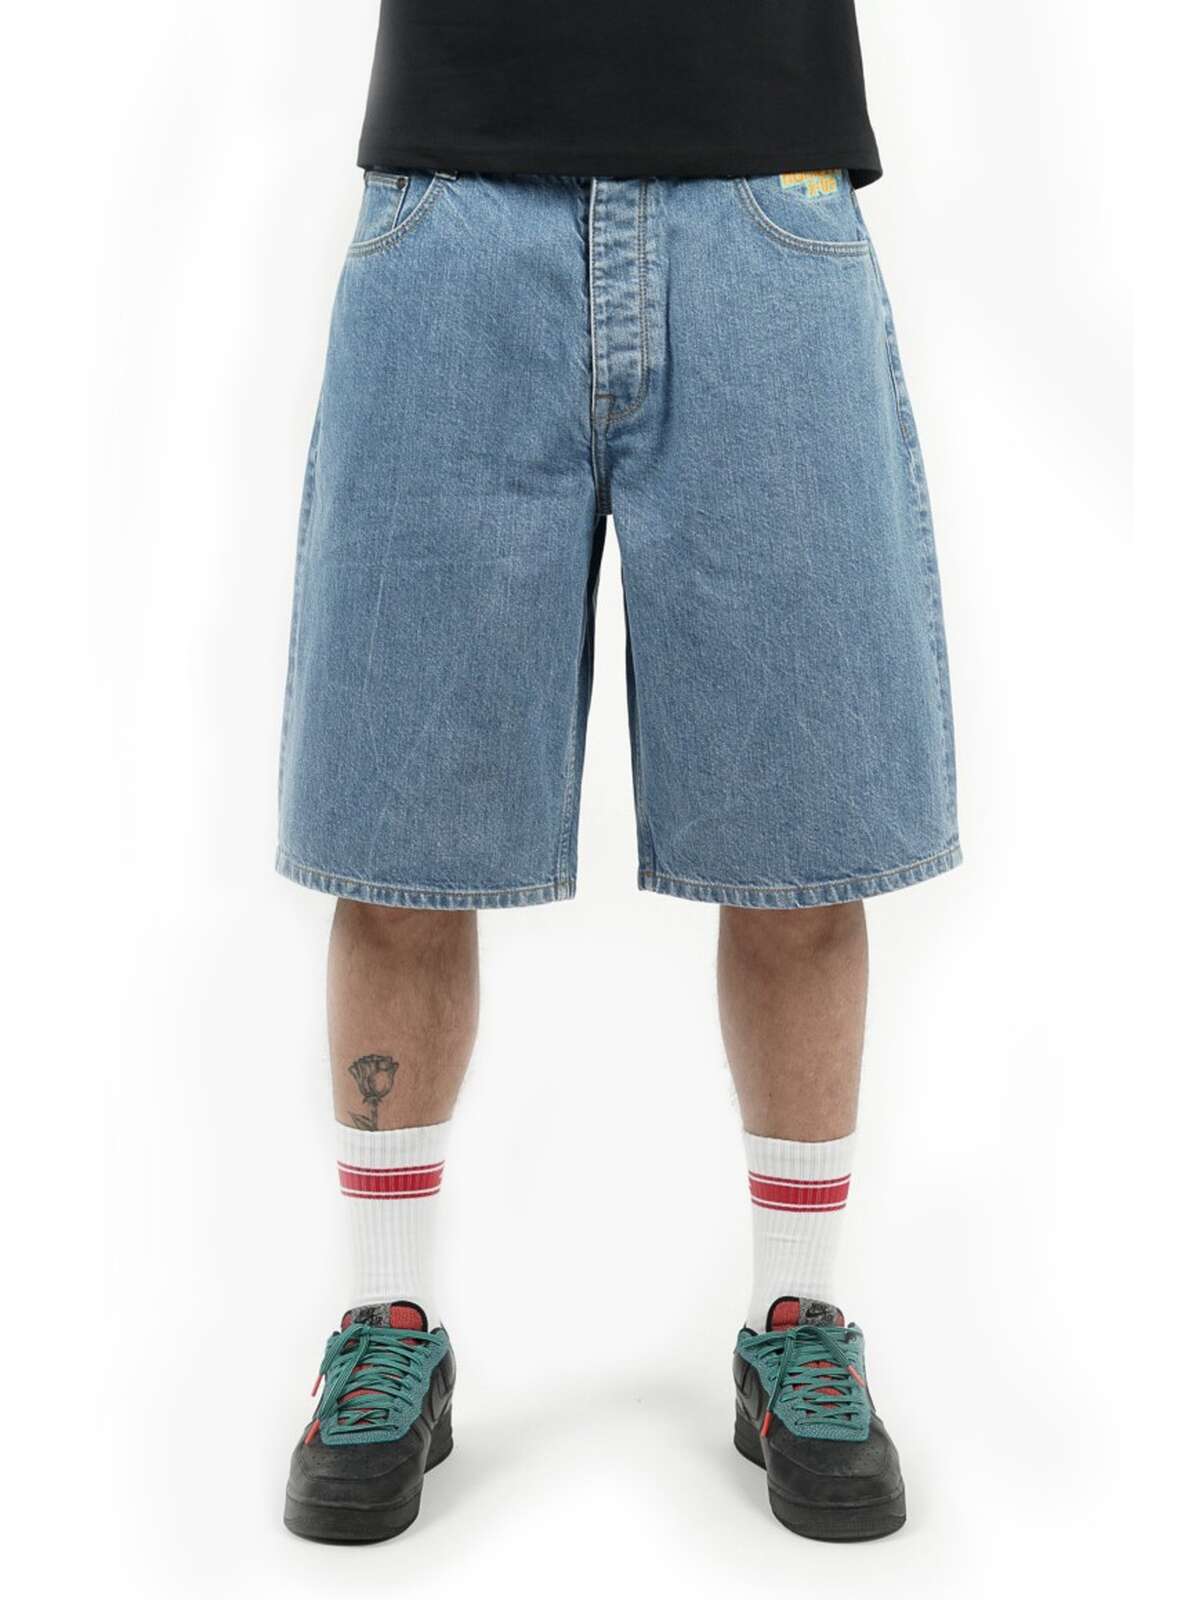 HOMEBOY - X-TRA MONSTER SHORTS - MOON